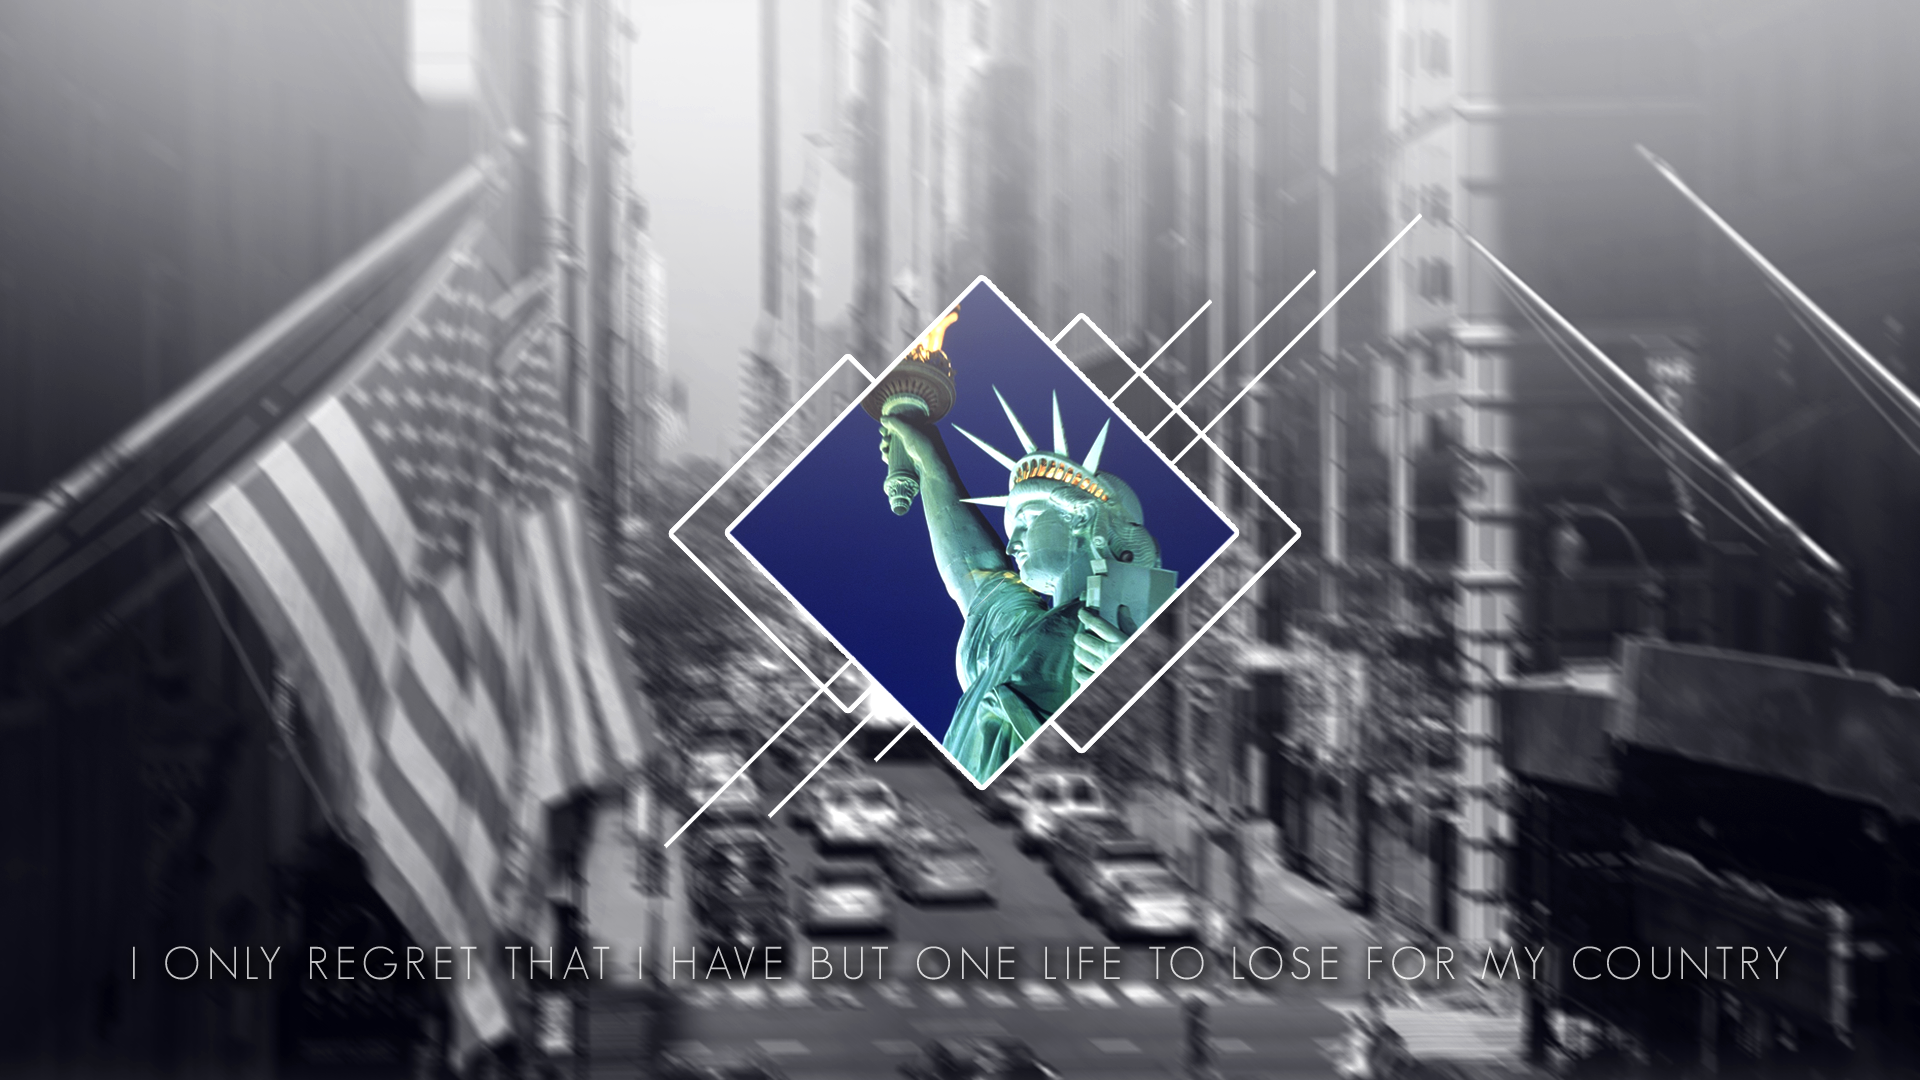 General 1920x1080 Statue of Liberty American flag city